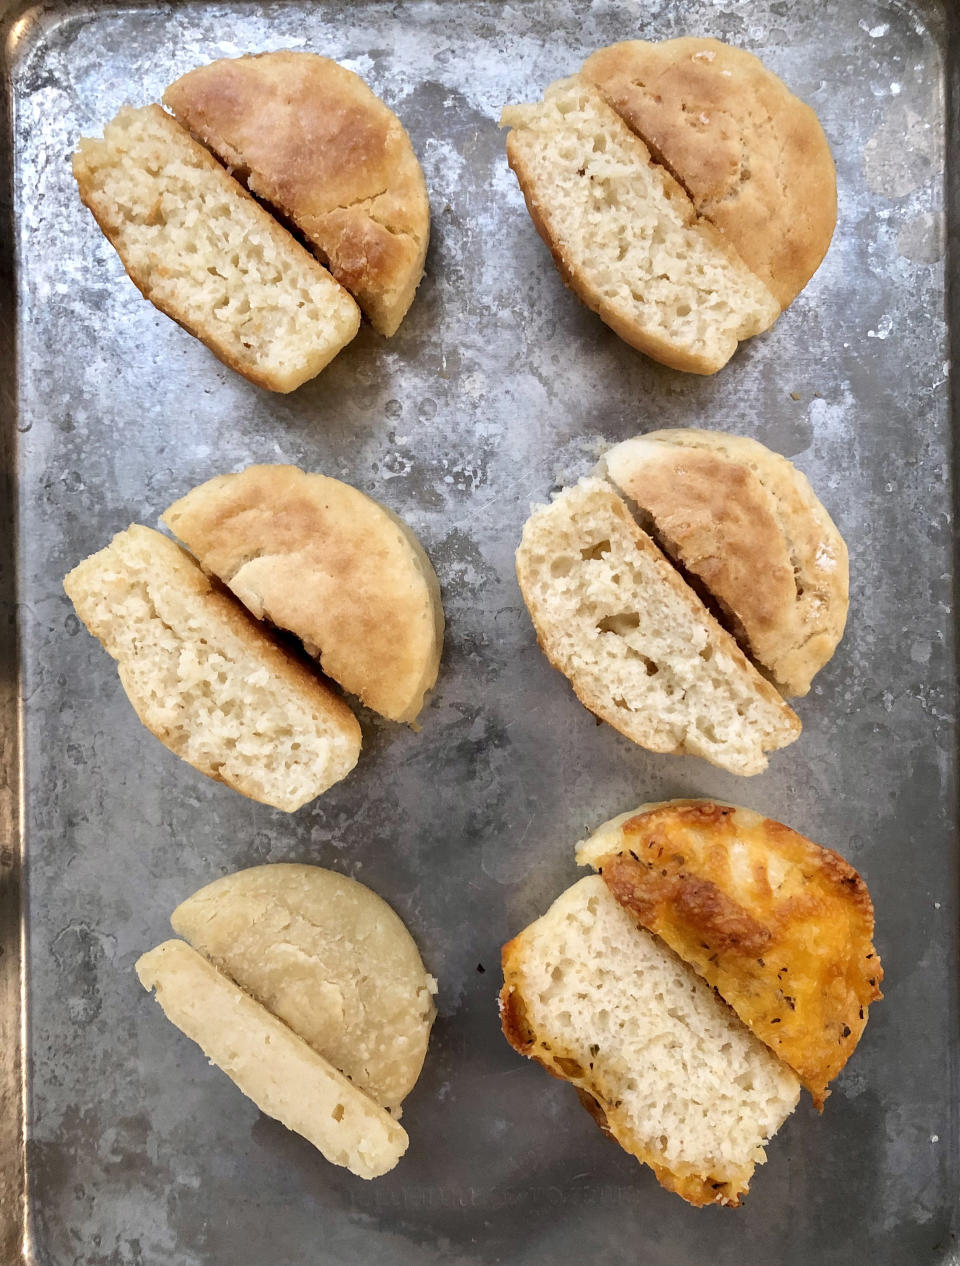 The mayo roll recipe with (from top, left to right): double the mayo, half the mayo, more milk, no oiling of the pan, non-self-rising flour and cheddar-topped. (Courtesy Heather Martin)